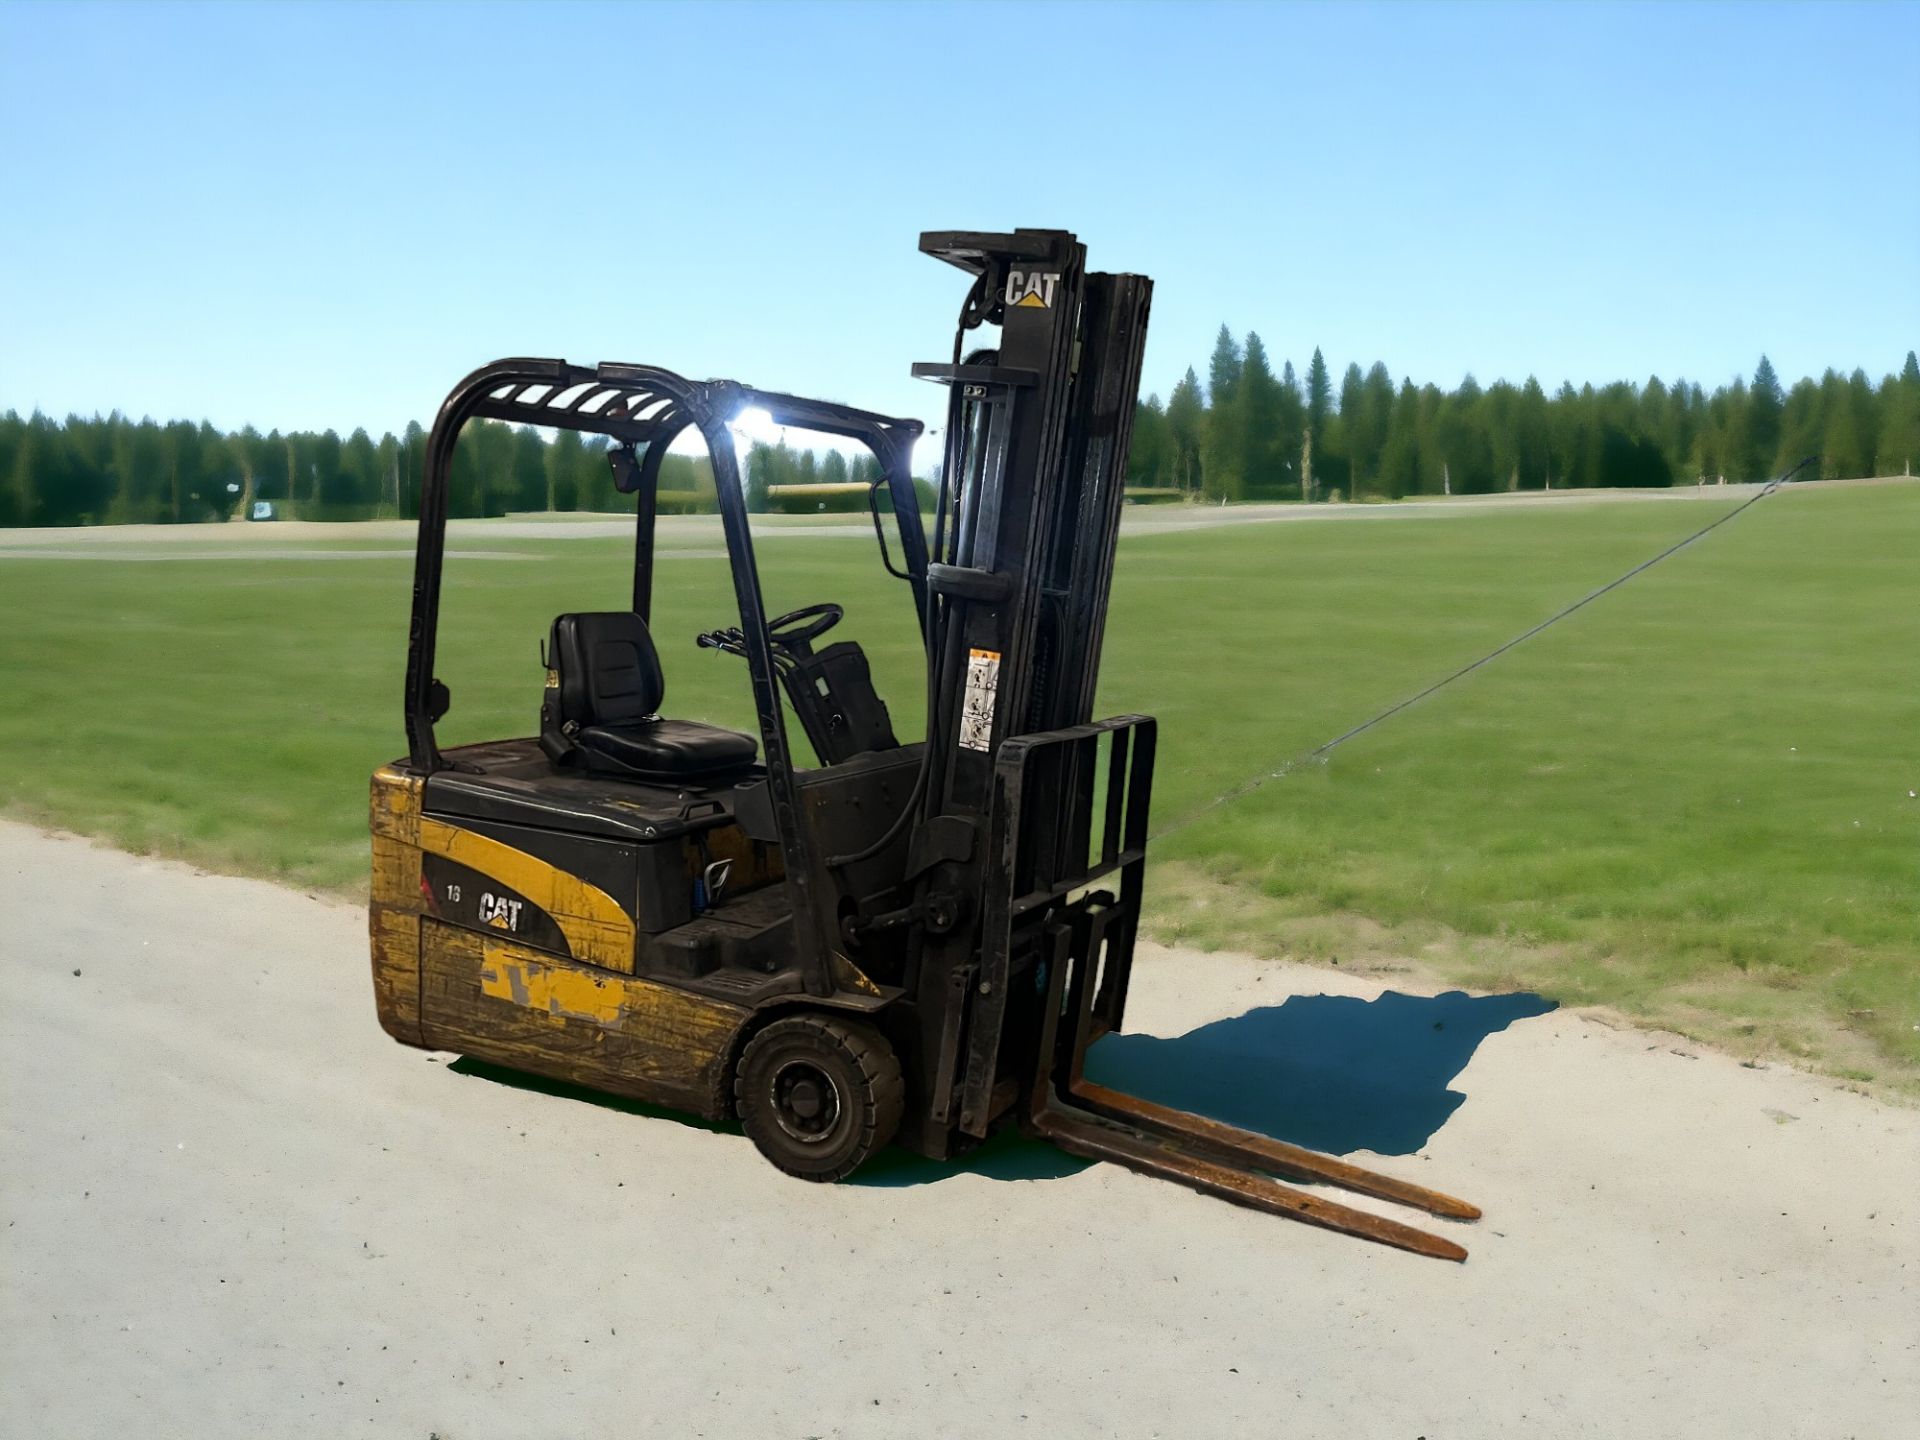 CAT LIFT TRUCKS ELECTRIC 3-WHEEL FORKLIFT - EP18NT (2007) **(INCLUDES CHARGER)** - Image 4 of 6